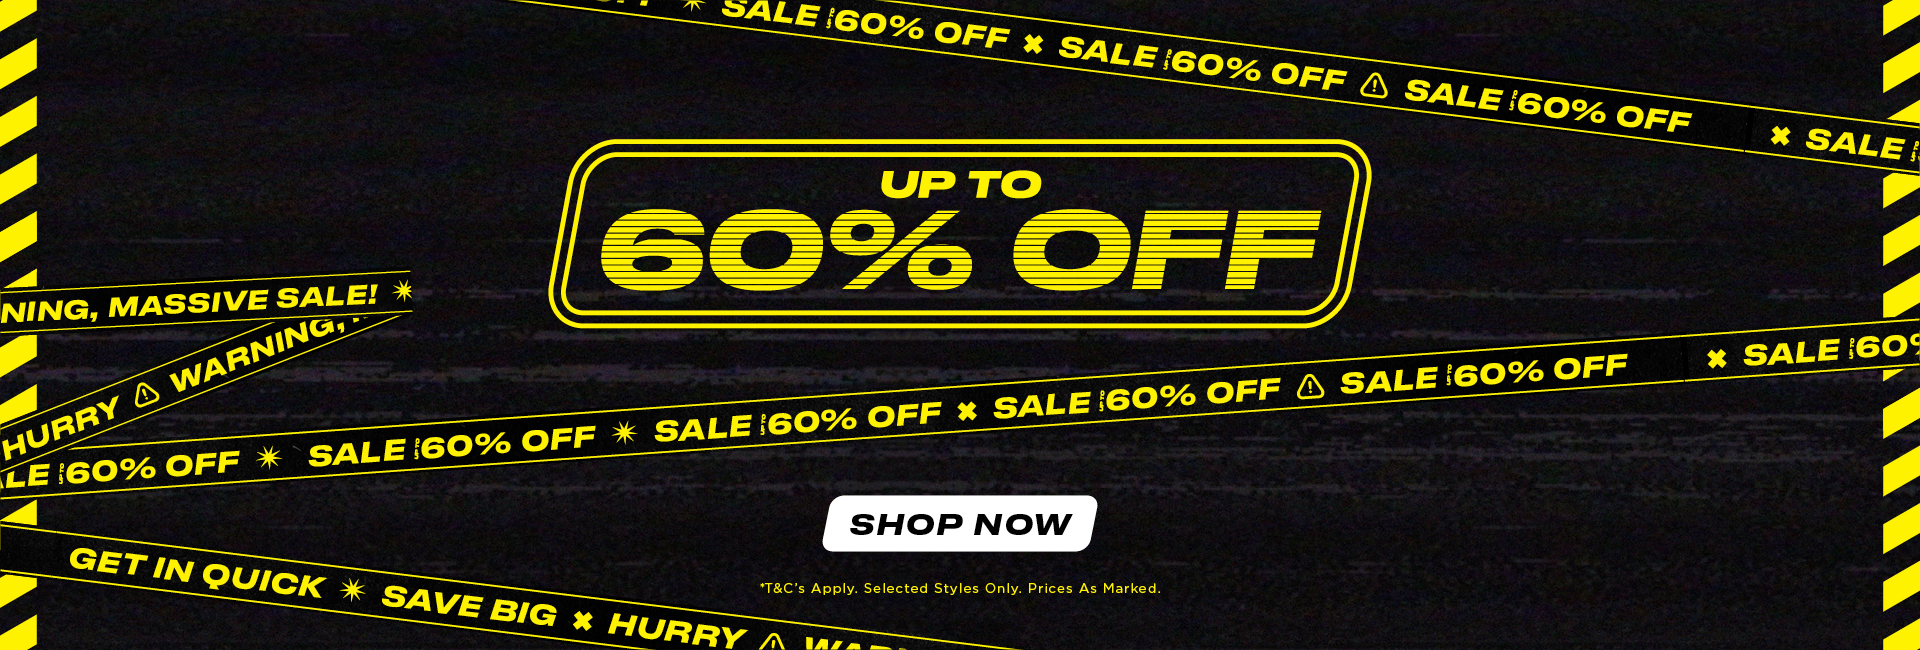 Platypus Shoes up to 60% OFF on selected styles including Vans, Puma, Skechers & more